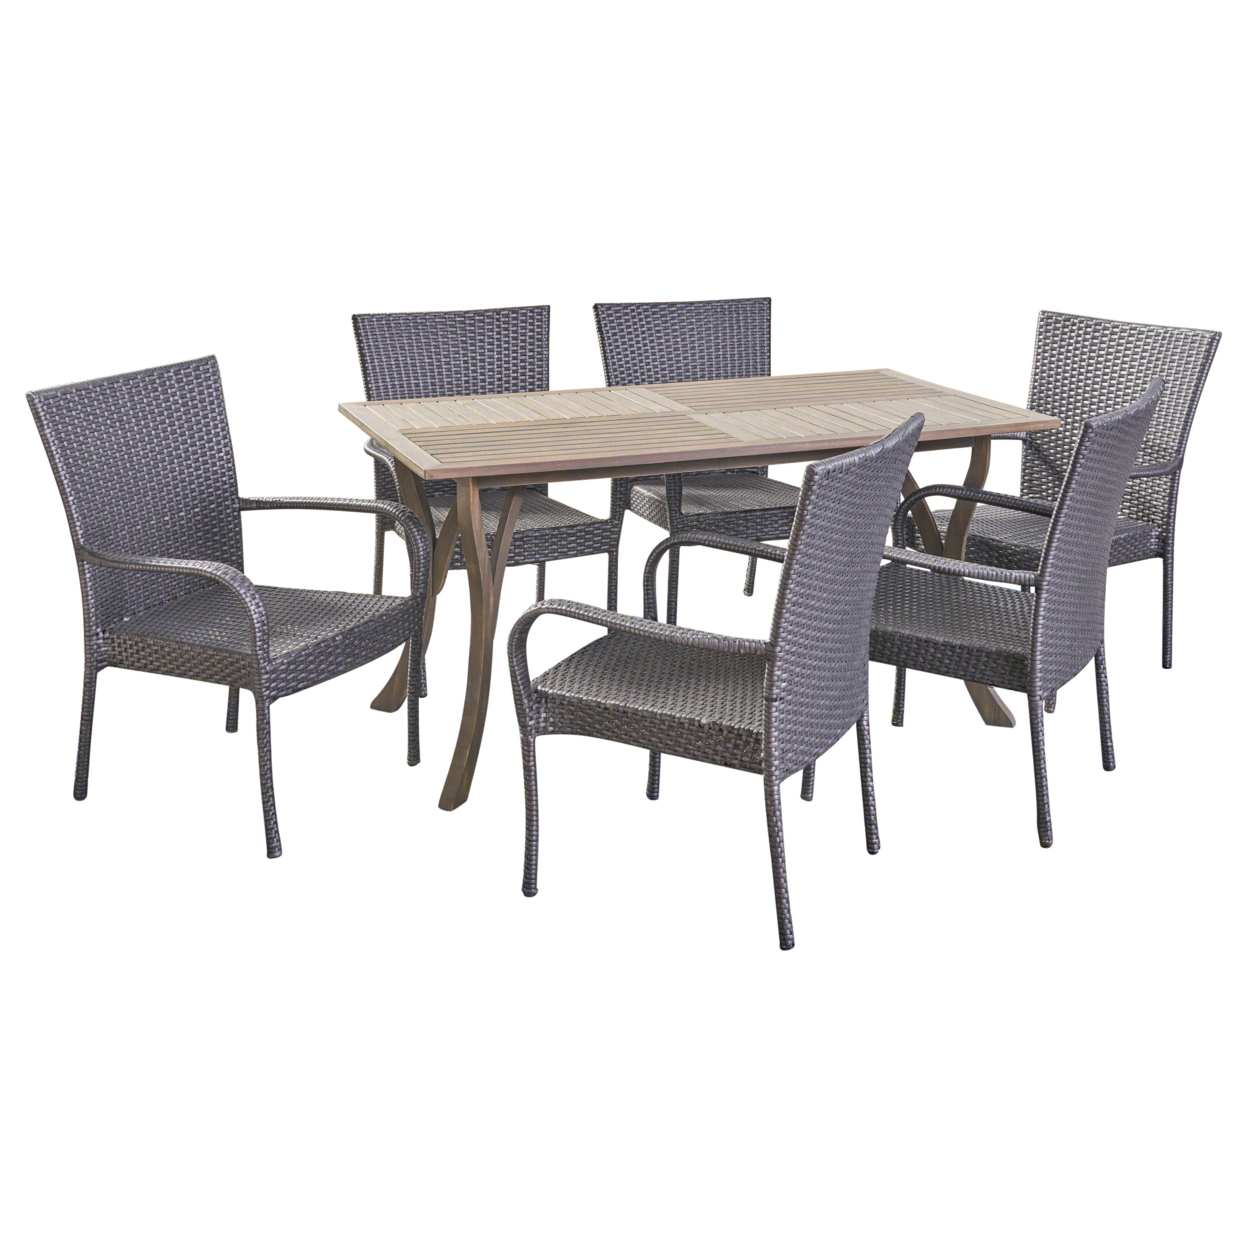 Robin Outdoor 7 Piece Wood And Wicker Dining Set, Gray And Gray